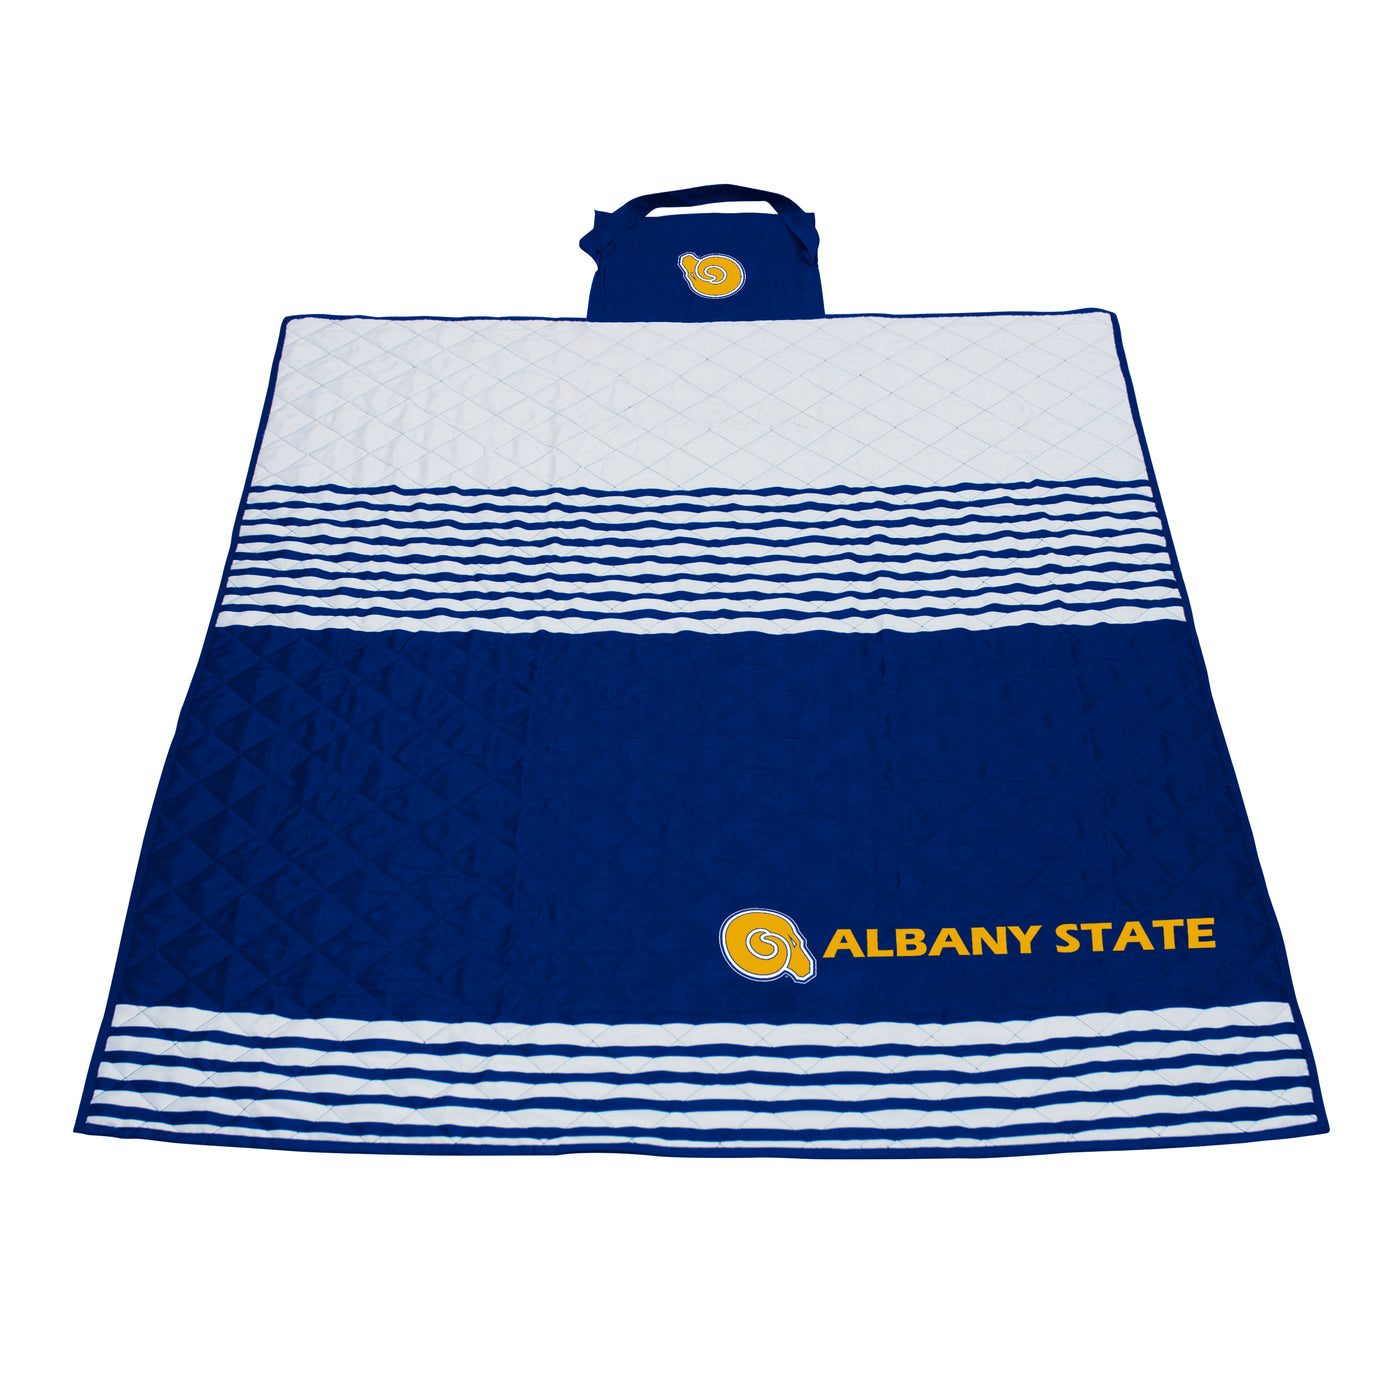 Albany State Outdoor Blanket